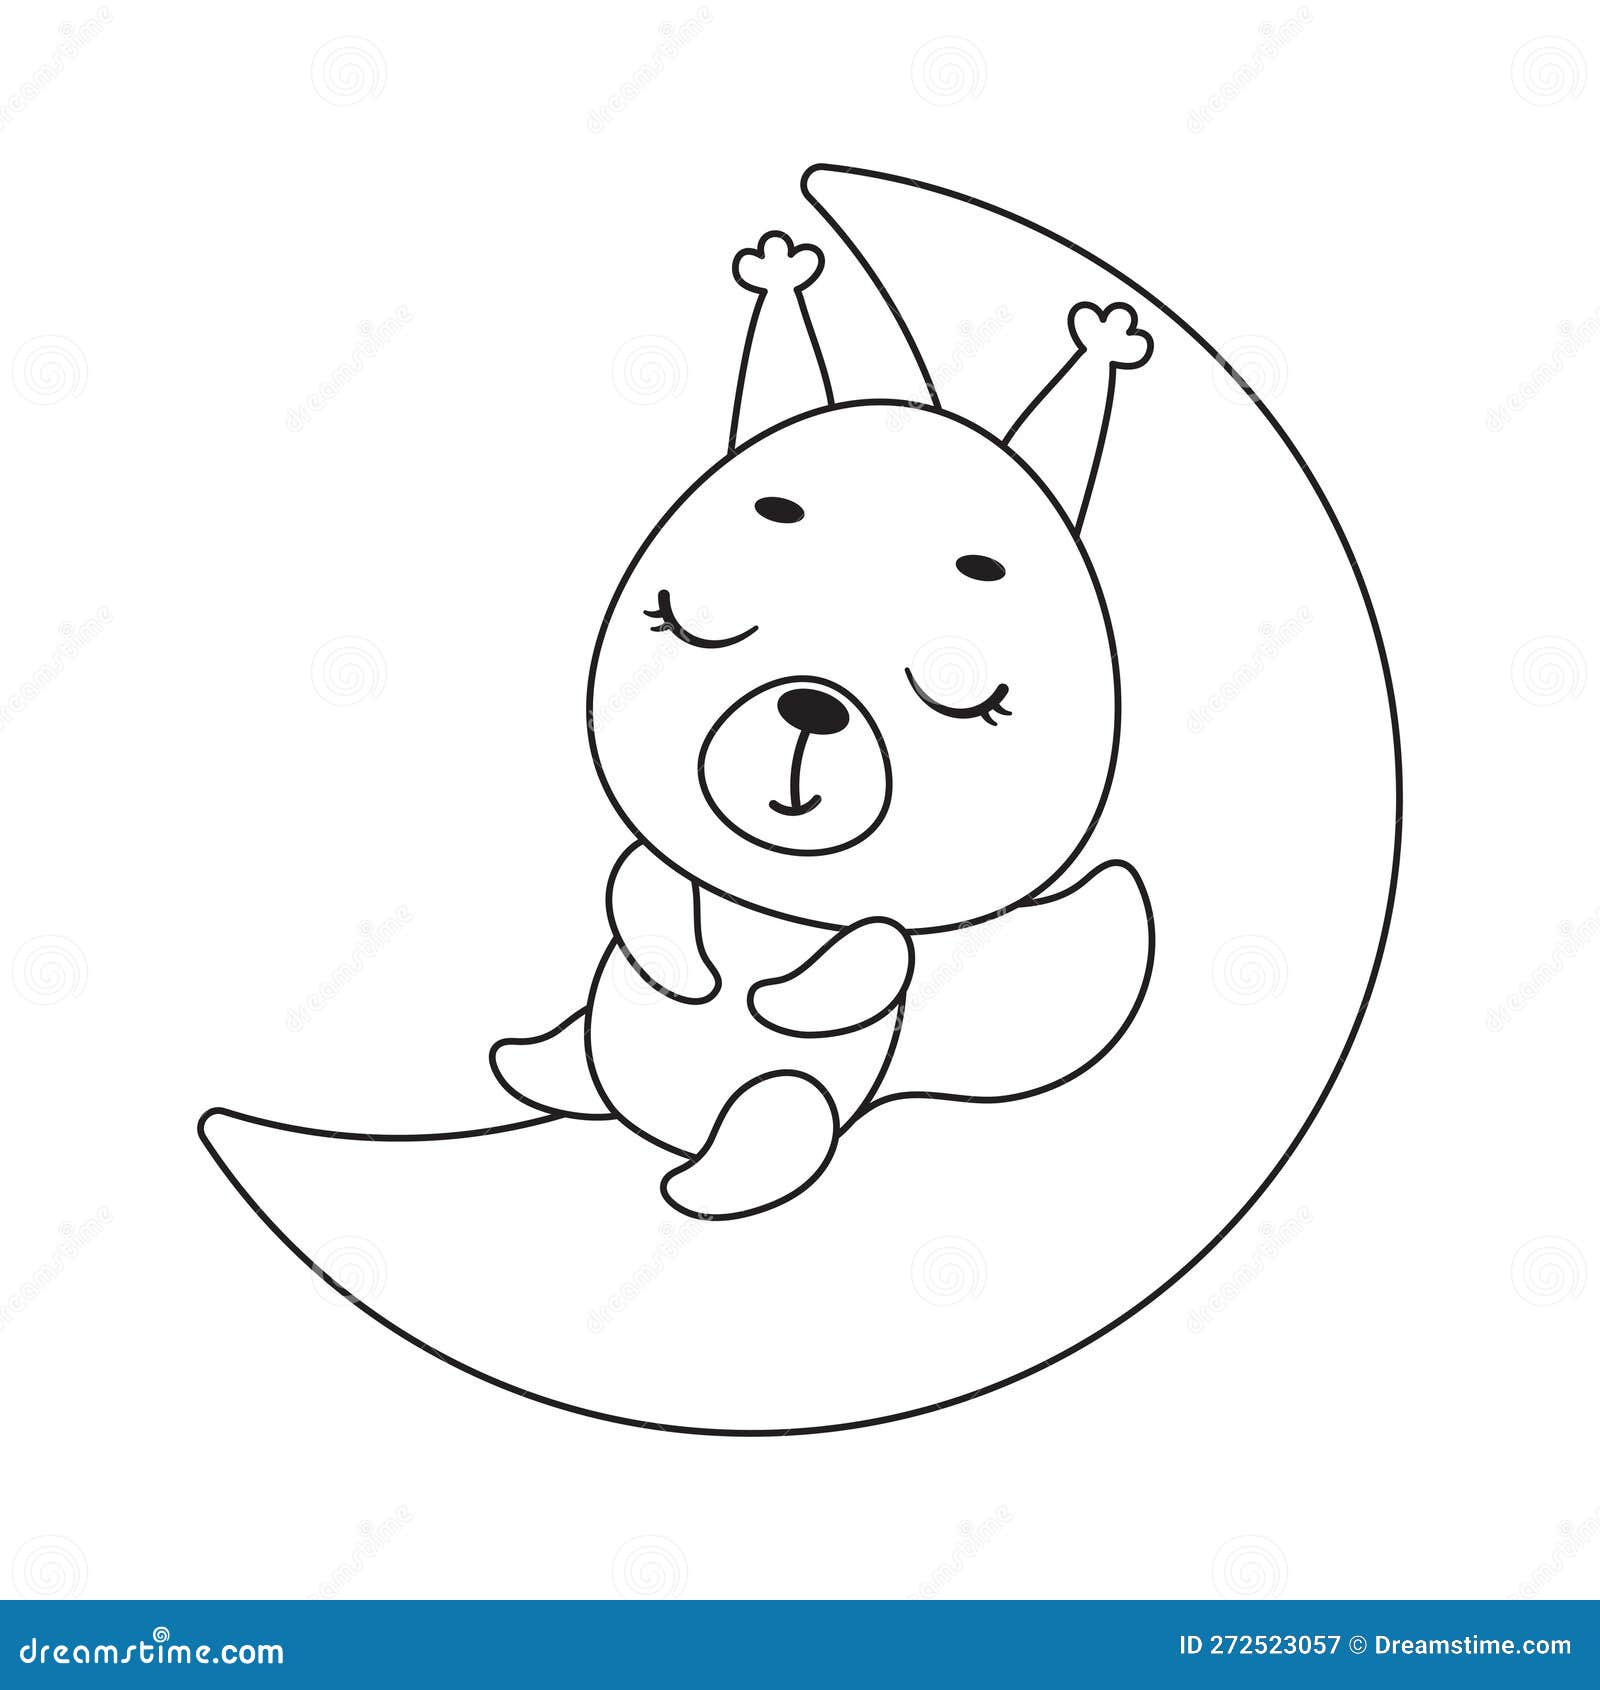 Coloring Page Cute Little Squirrel Sleeping on Moon. Coloring Book for ...